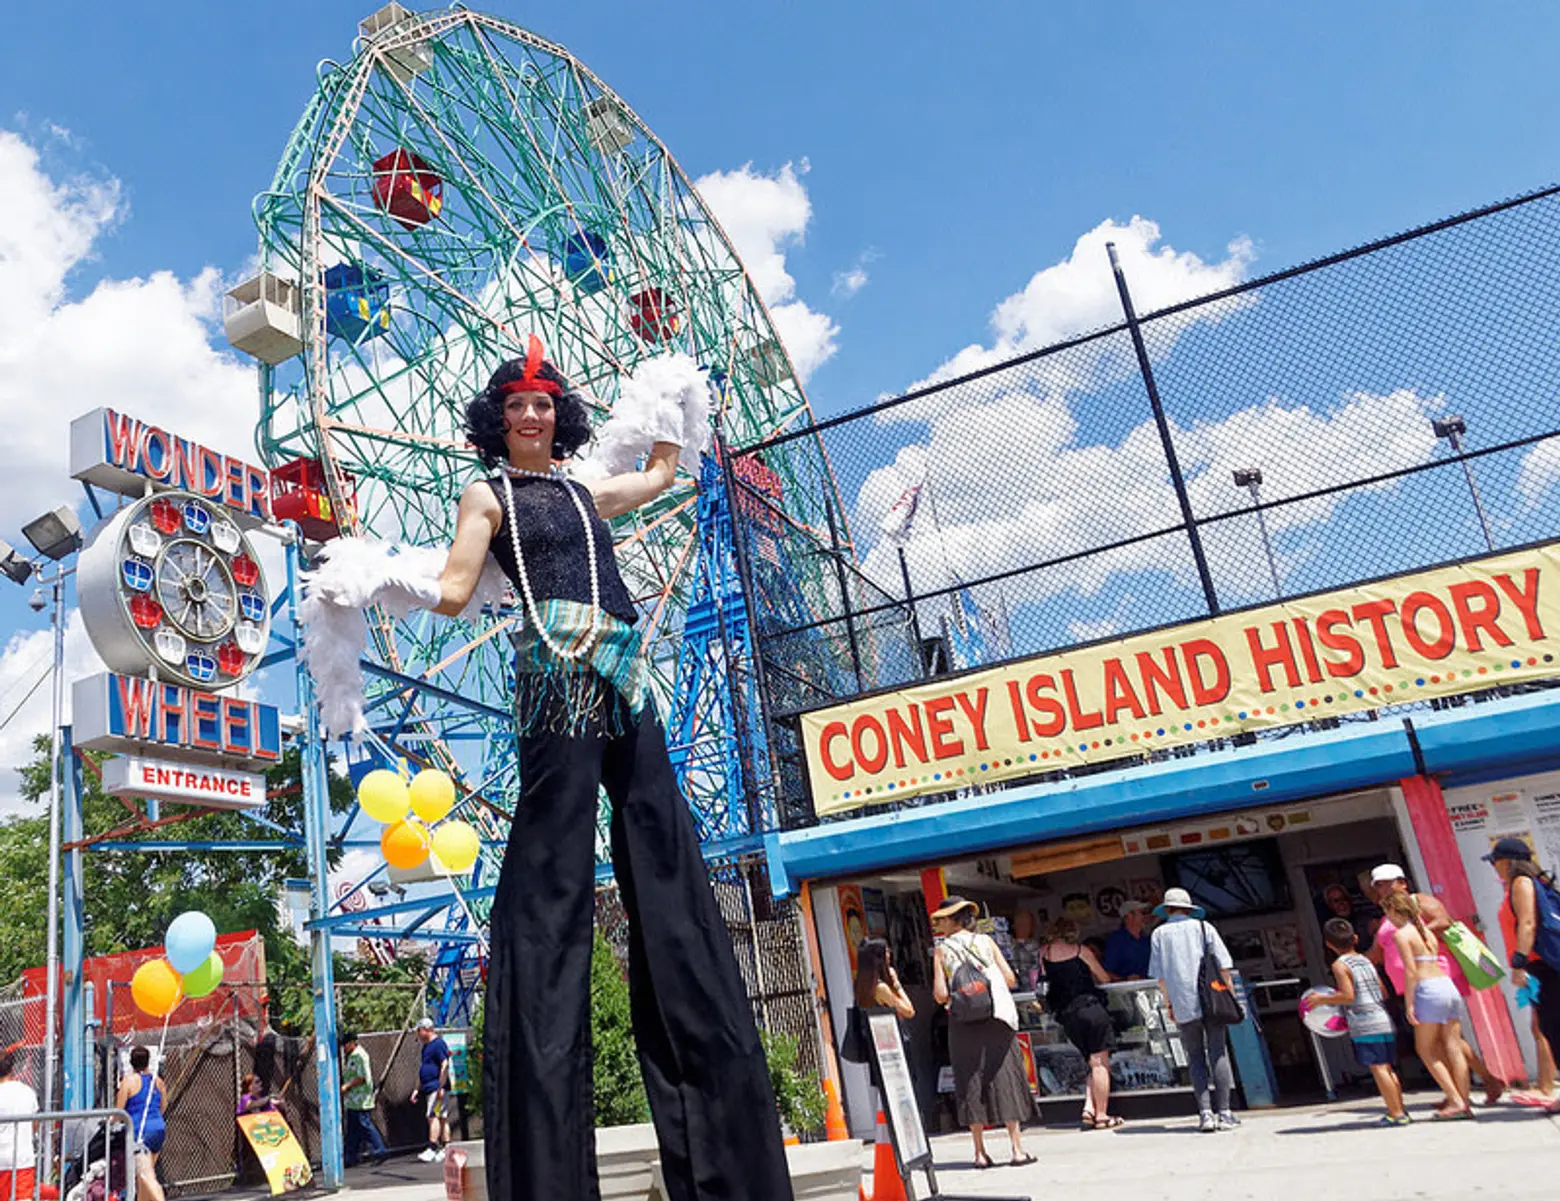 Celebrate Coney Island’s opening day with a walking tour of its newly landmarked boardwalk